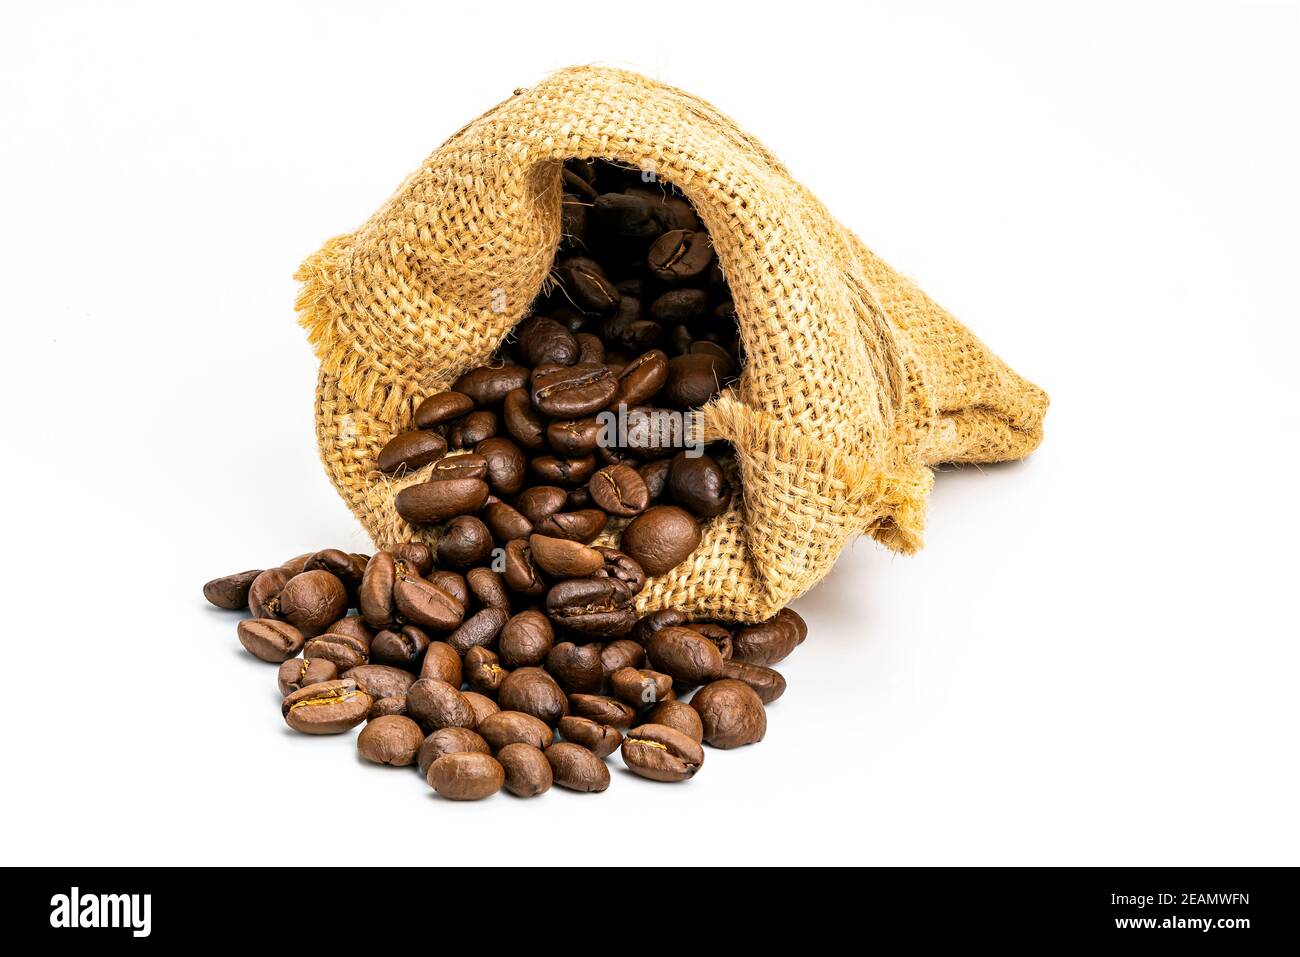 Coffee beans in a sack on white background. Coffee beans in a bag. Stock Photo